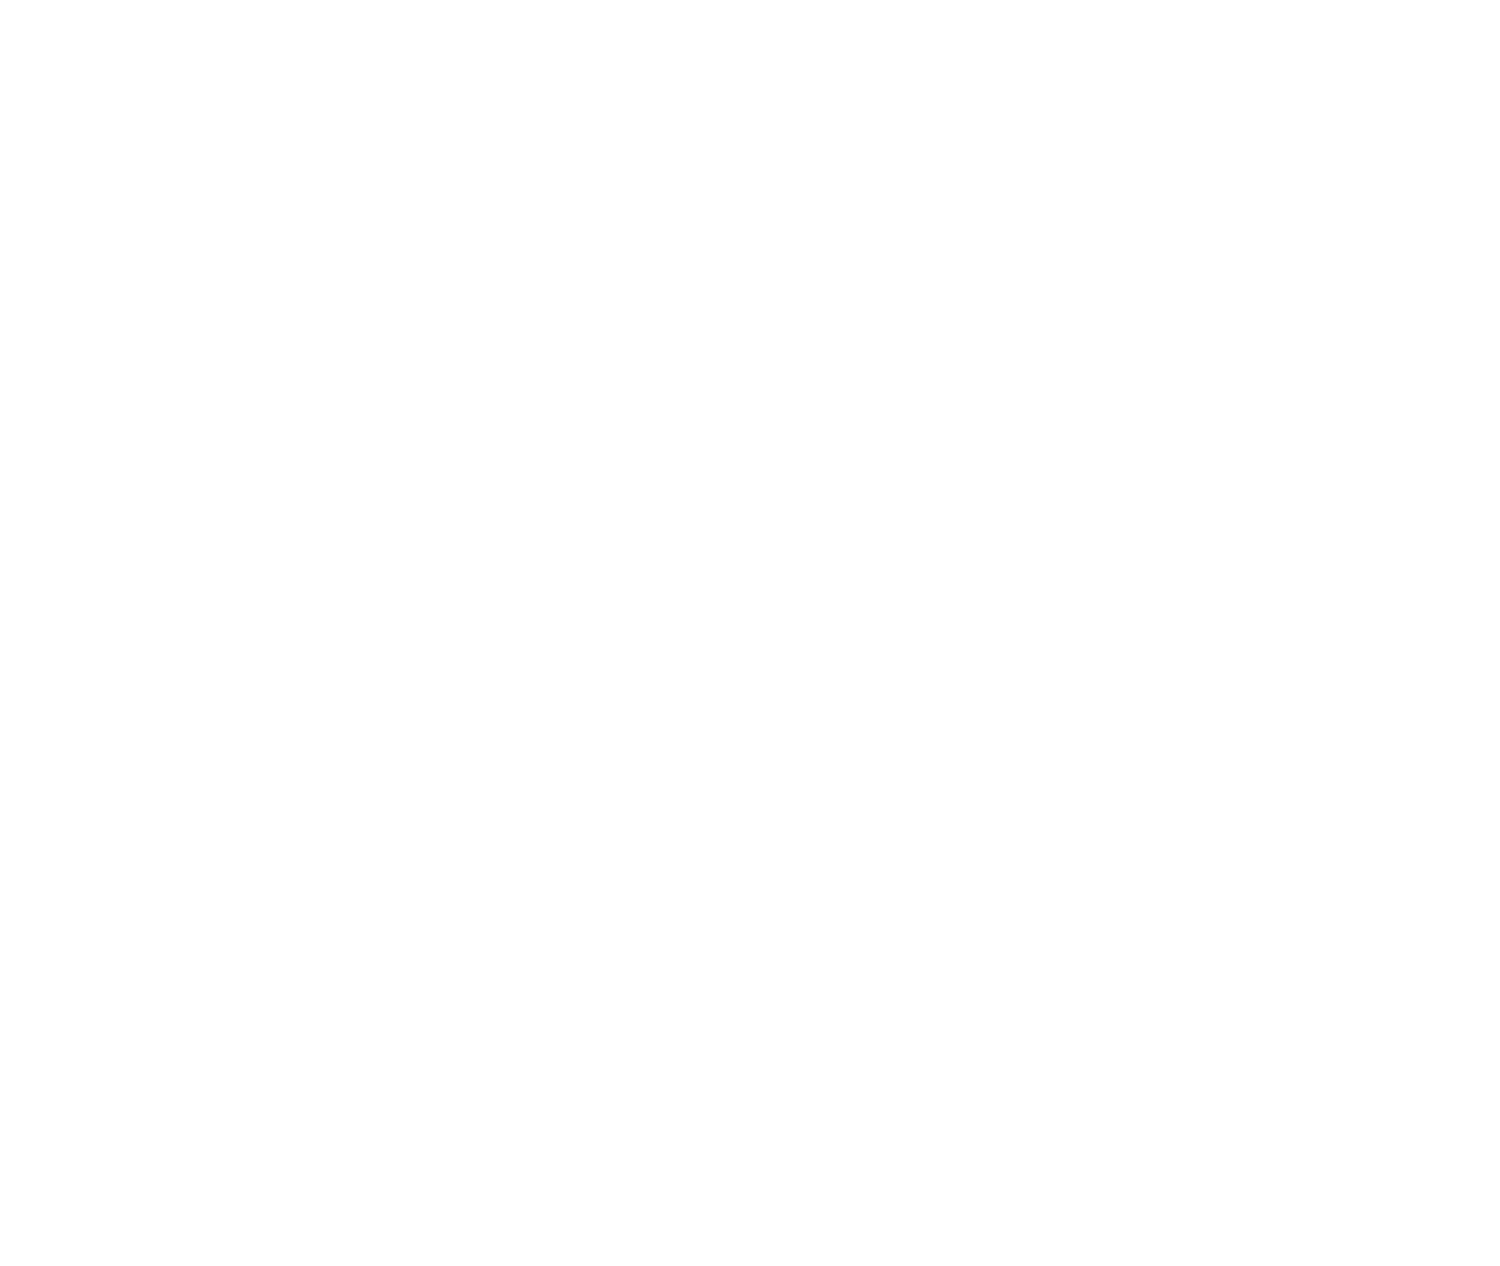 Blackmore Fencing Limited